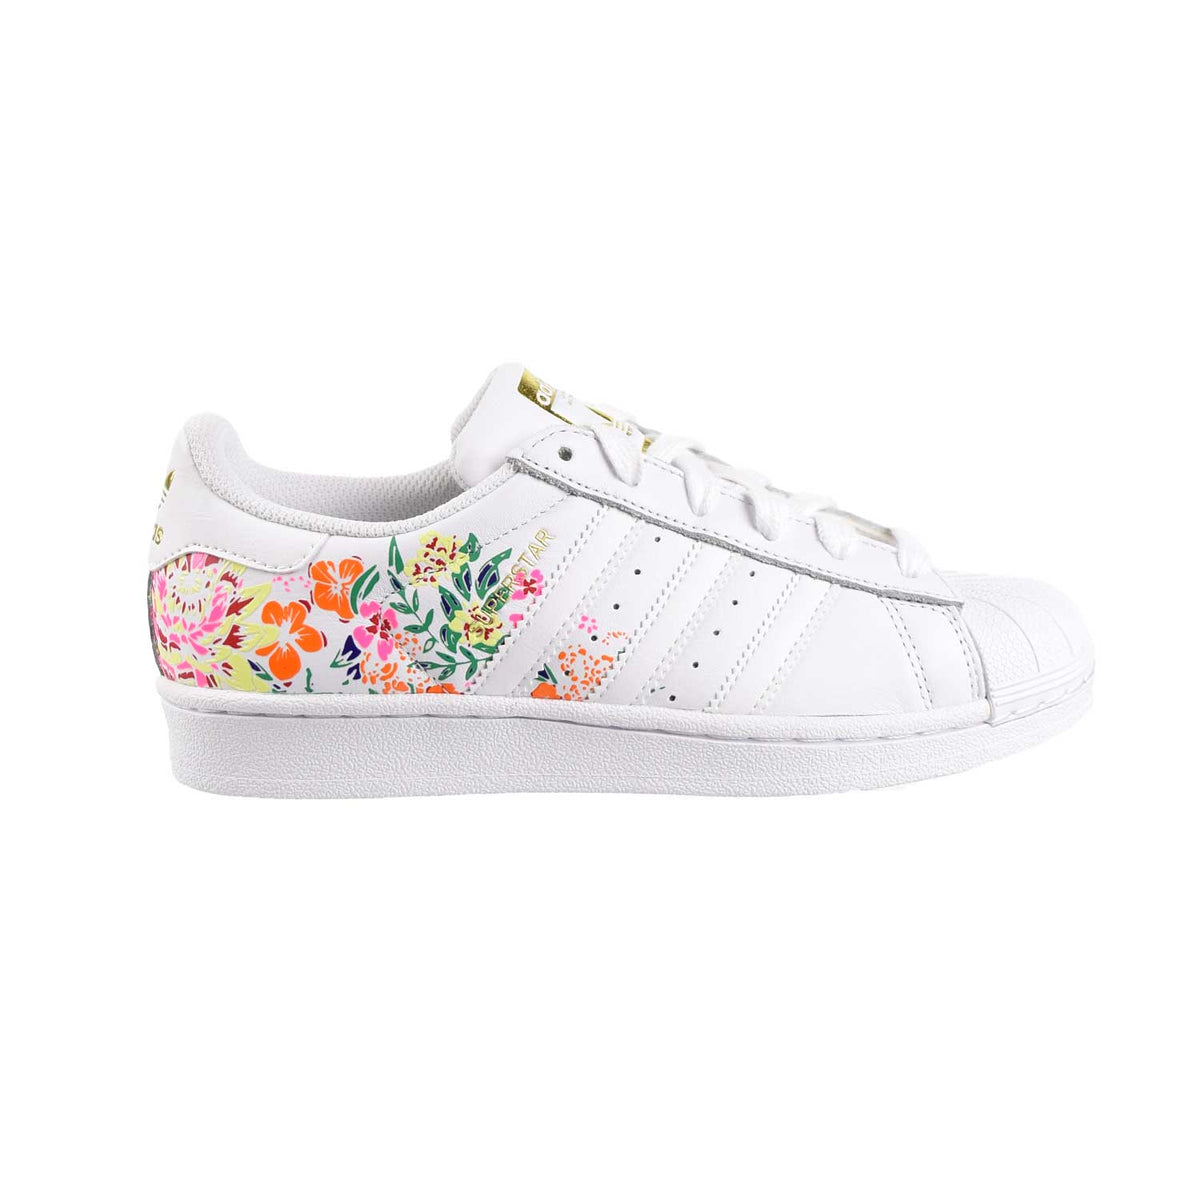 Adidas Superstar Womens Shoes Floral Footwear Metallic – Sports Plaza NY